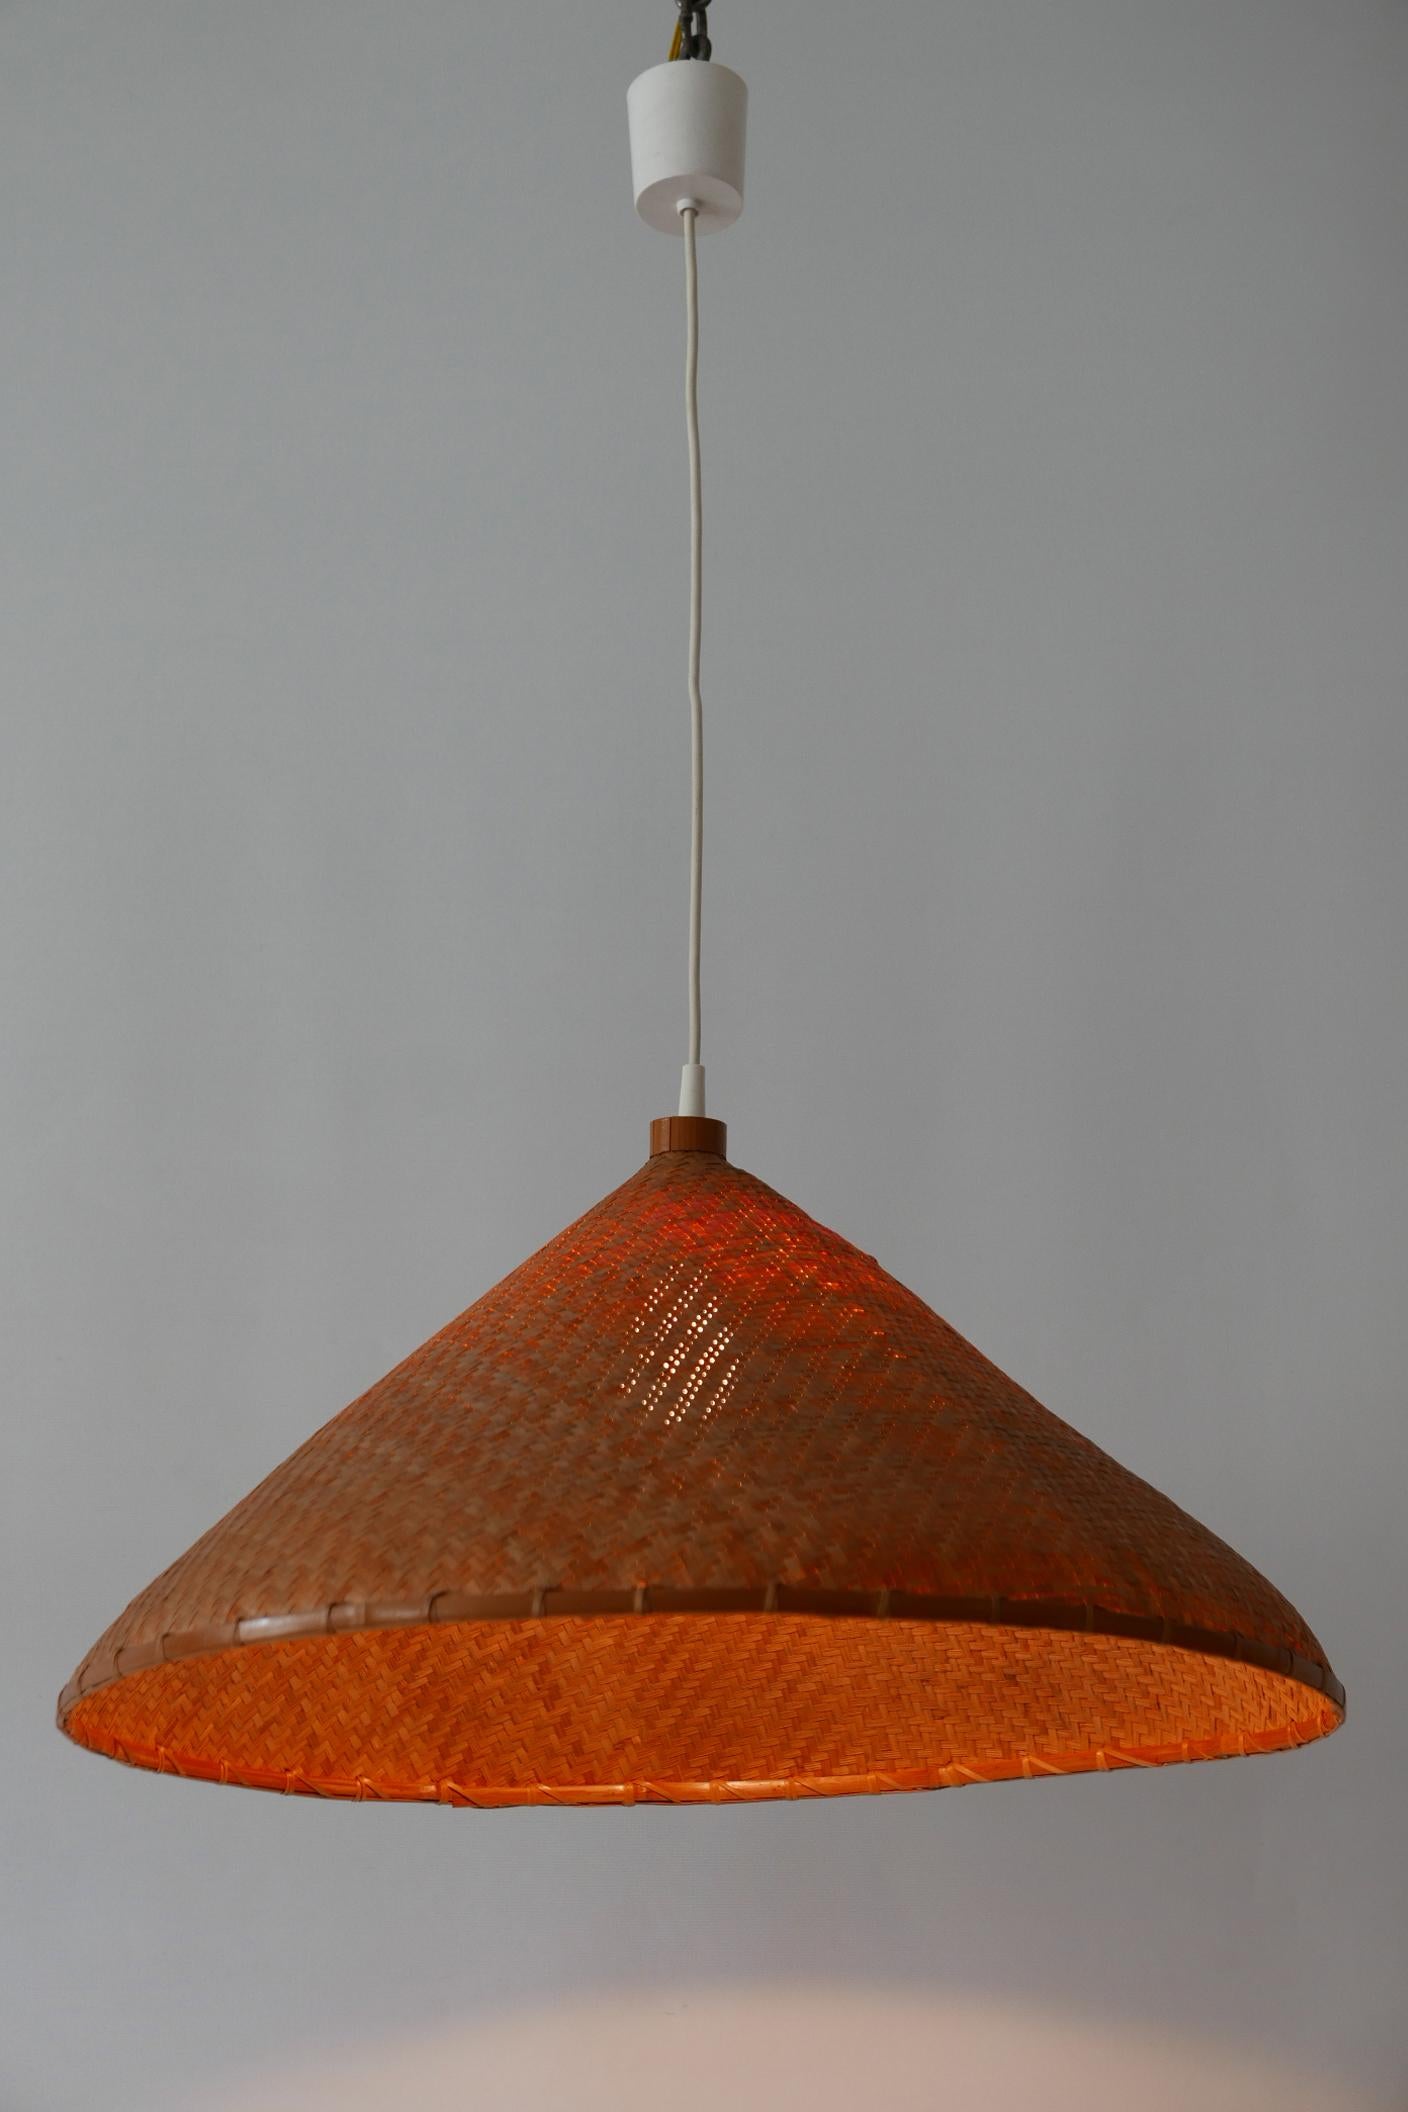 Large Mid-Century Modern Wicker Pendant Lamp or Hanging Light, Germany, 1960s For Sale 7